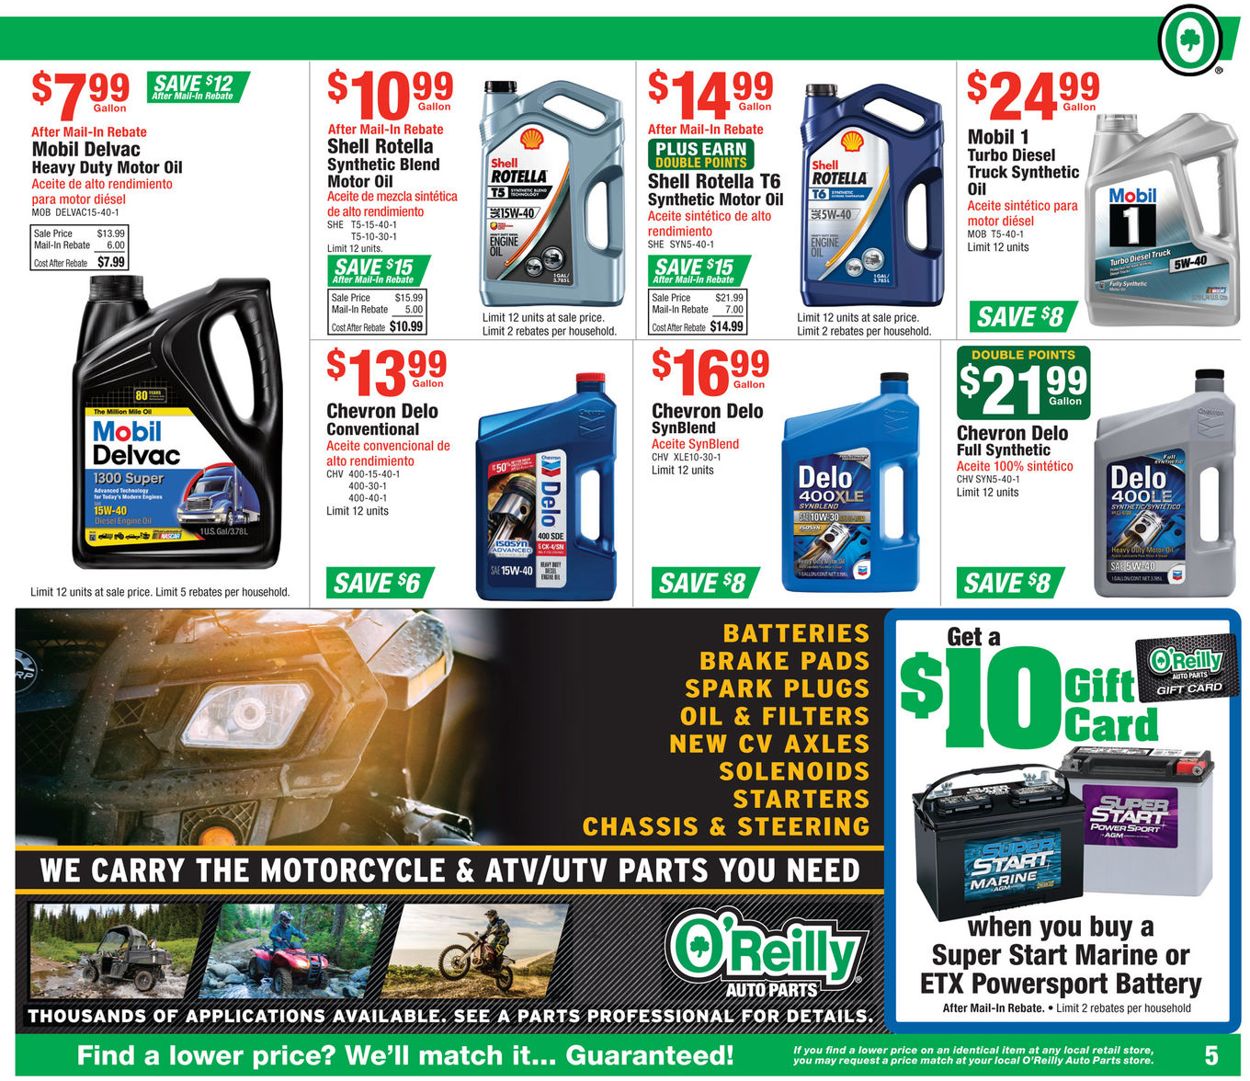 O Reilly Auto Parts Mail In Rebate Colors